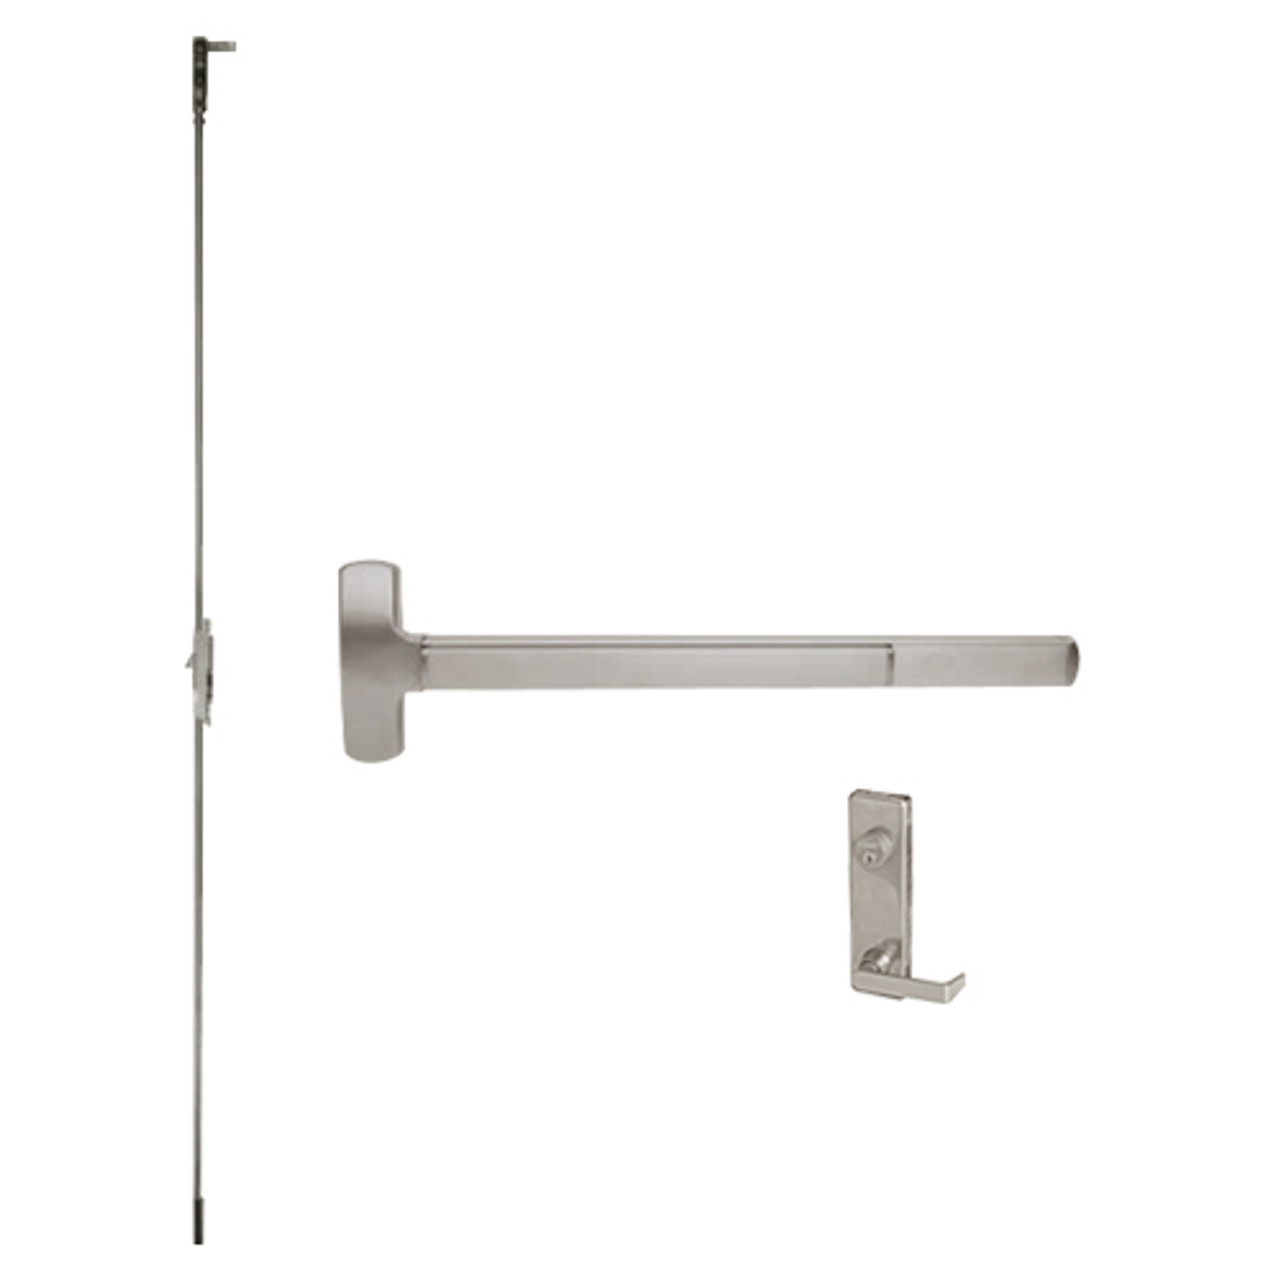 F-25-C-L-DANE-US32D-3-RHR Falcon Exit Device in Satin Stainless Steel